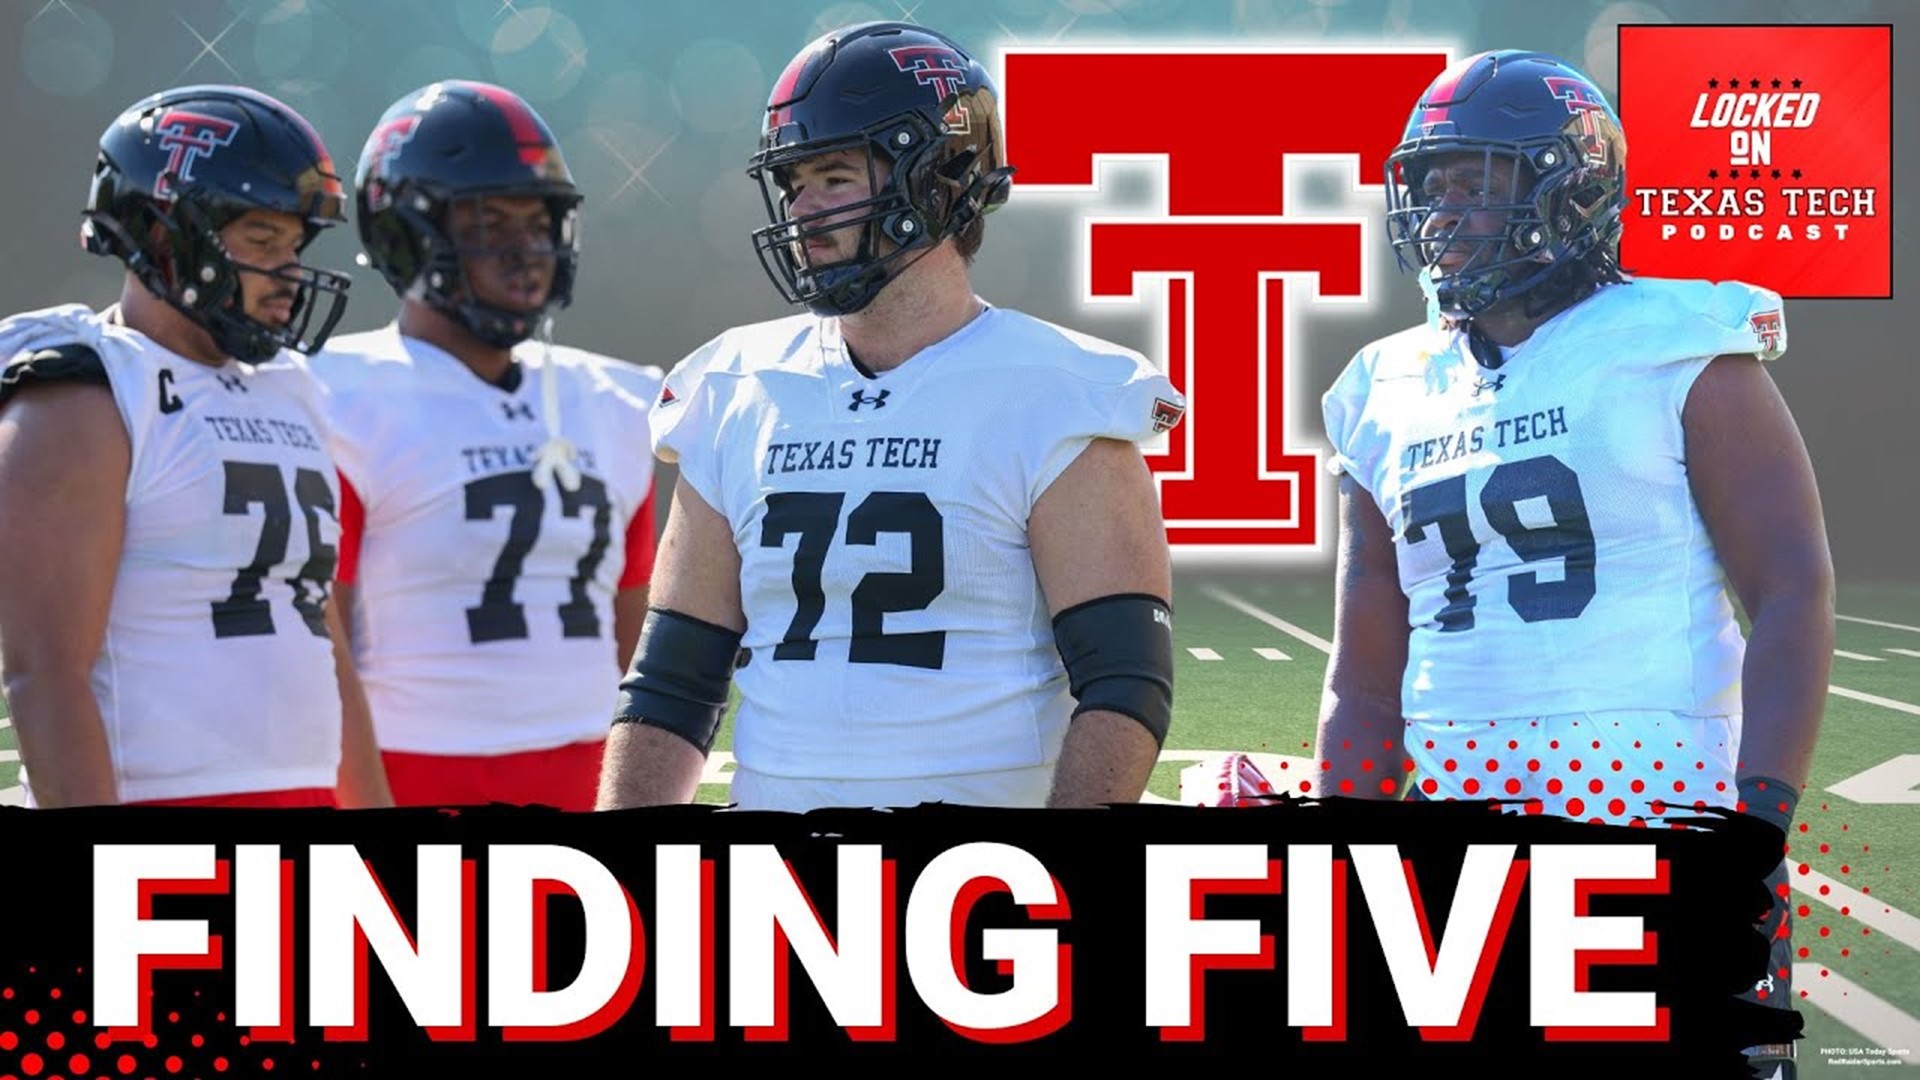 Today from Lubbock, TX, on Locked On Texas Tech:

- Double T dignitaries
- Clay McGuire 
- Caleb Rodgers, left tackle casting call
- L.O.T.T. eclipse protocol